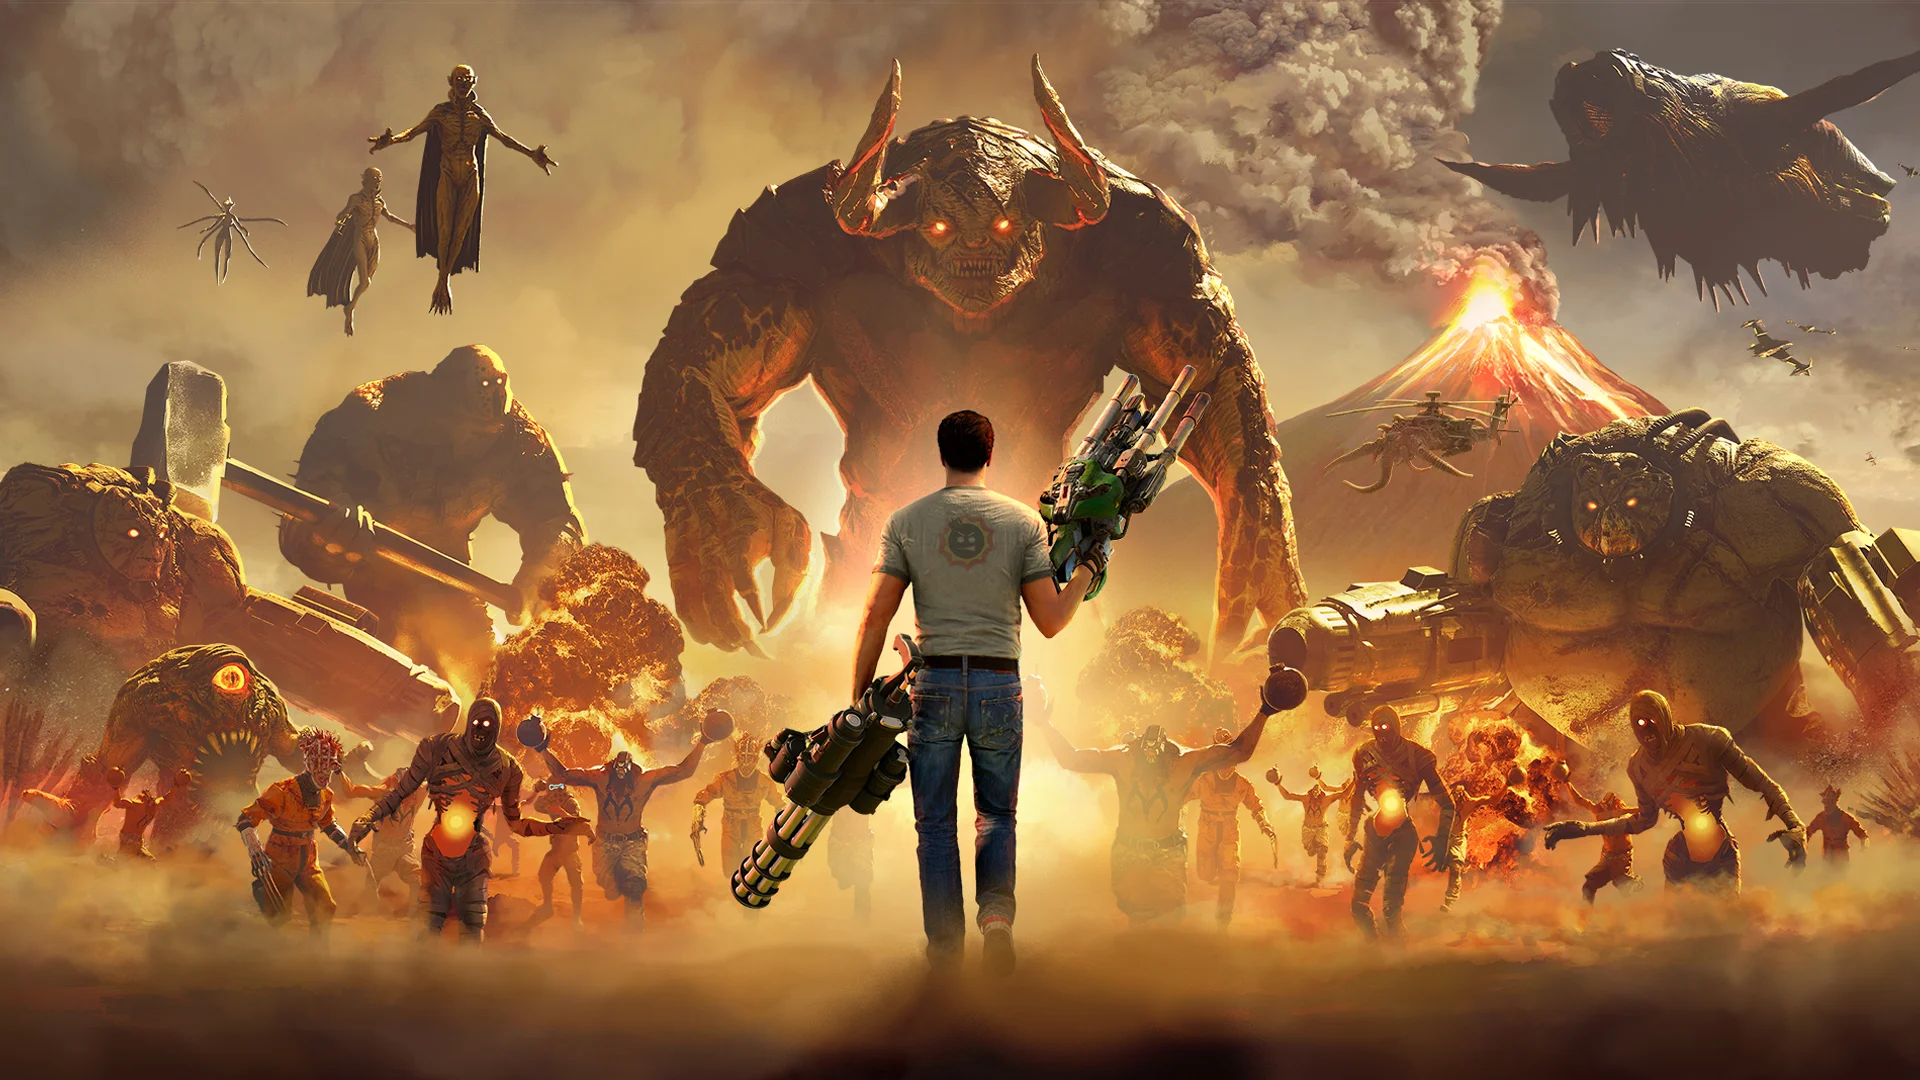 Stadia Exclusivity Will Keep Serious Sam 4 Off PS4 And Xbox Until 2021